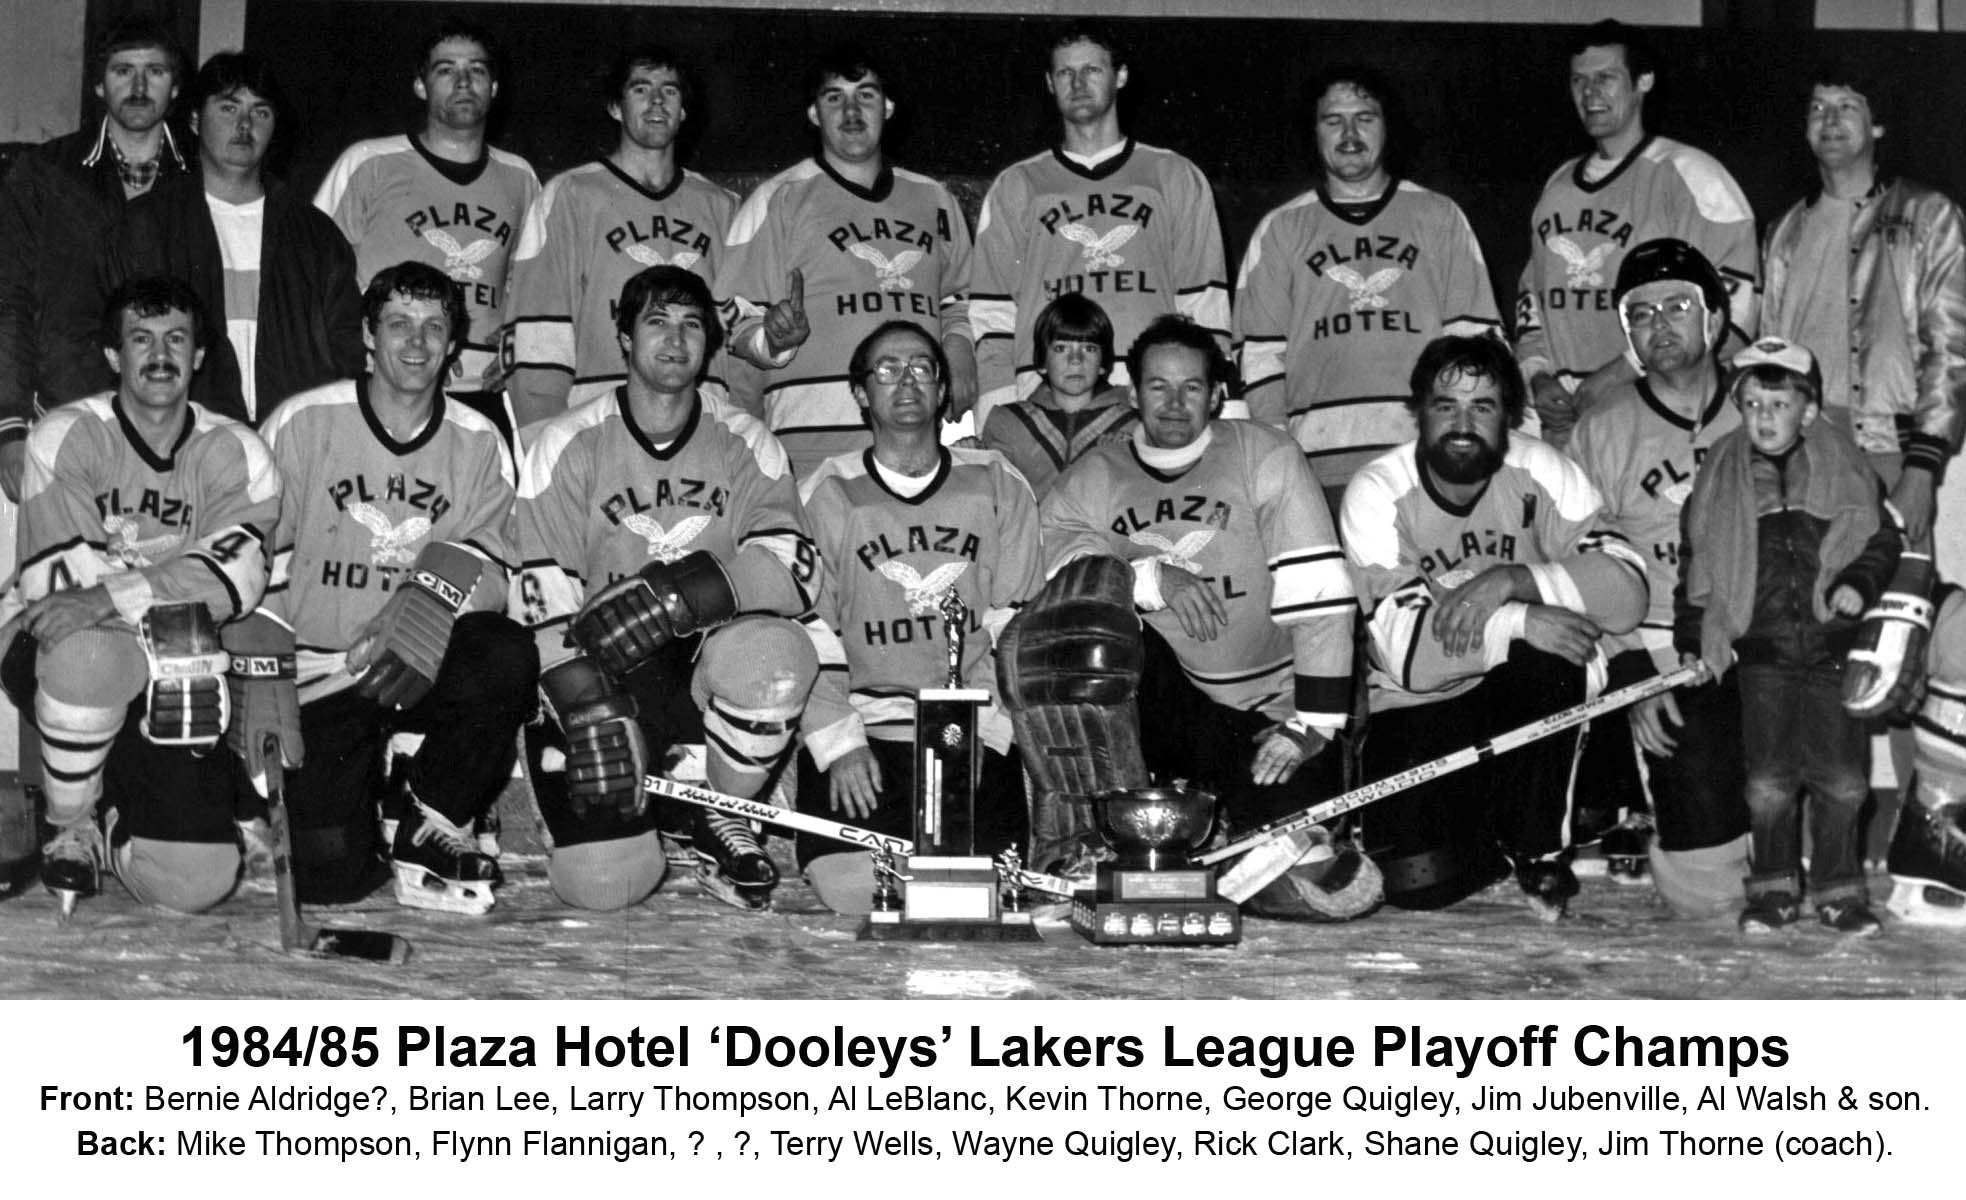 20JJ-1984-85 Lakers League -Playoff Champs-Plaza Hotel Dooley